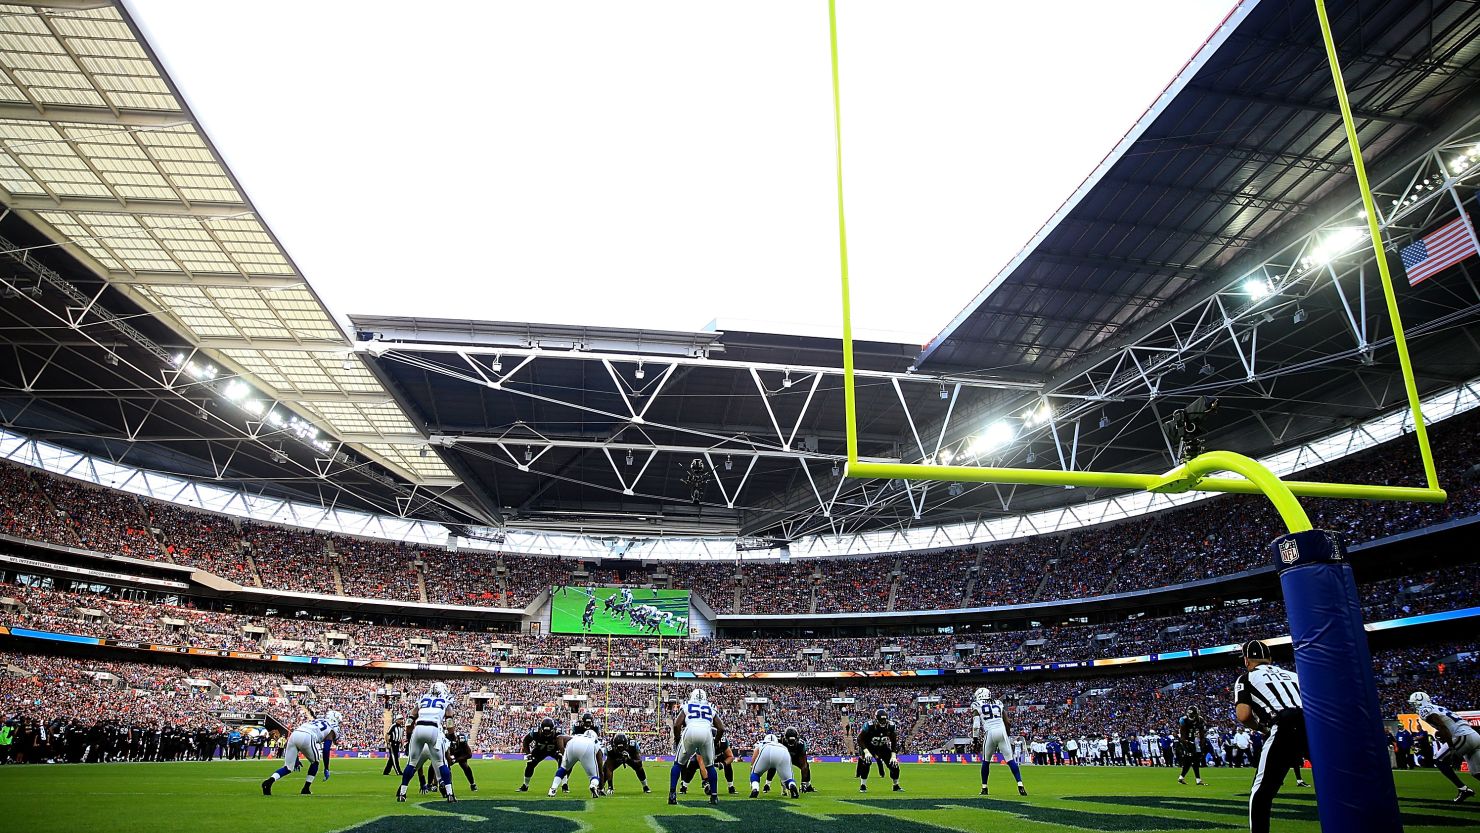  A general view of the NFL International Series match between Indianapolis Colts and Jacksonville Jaguars at Wembley Stadium on October 2, 2016.